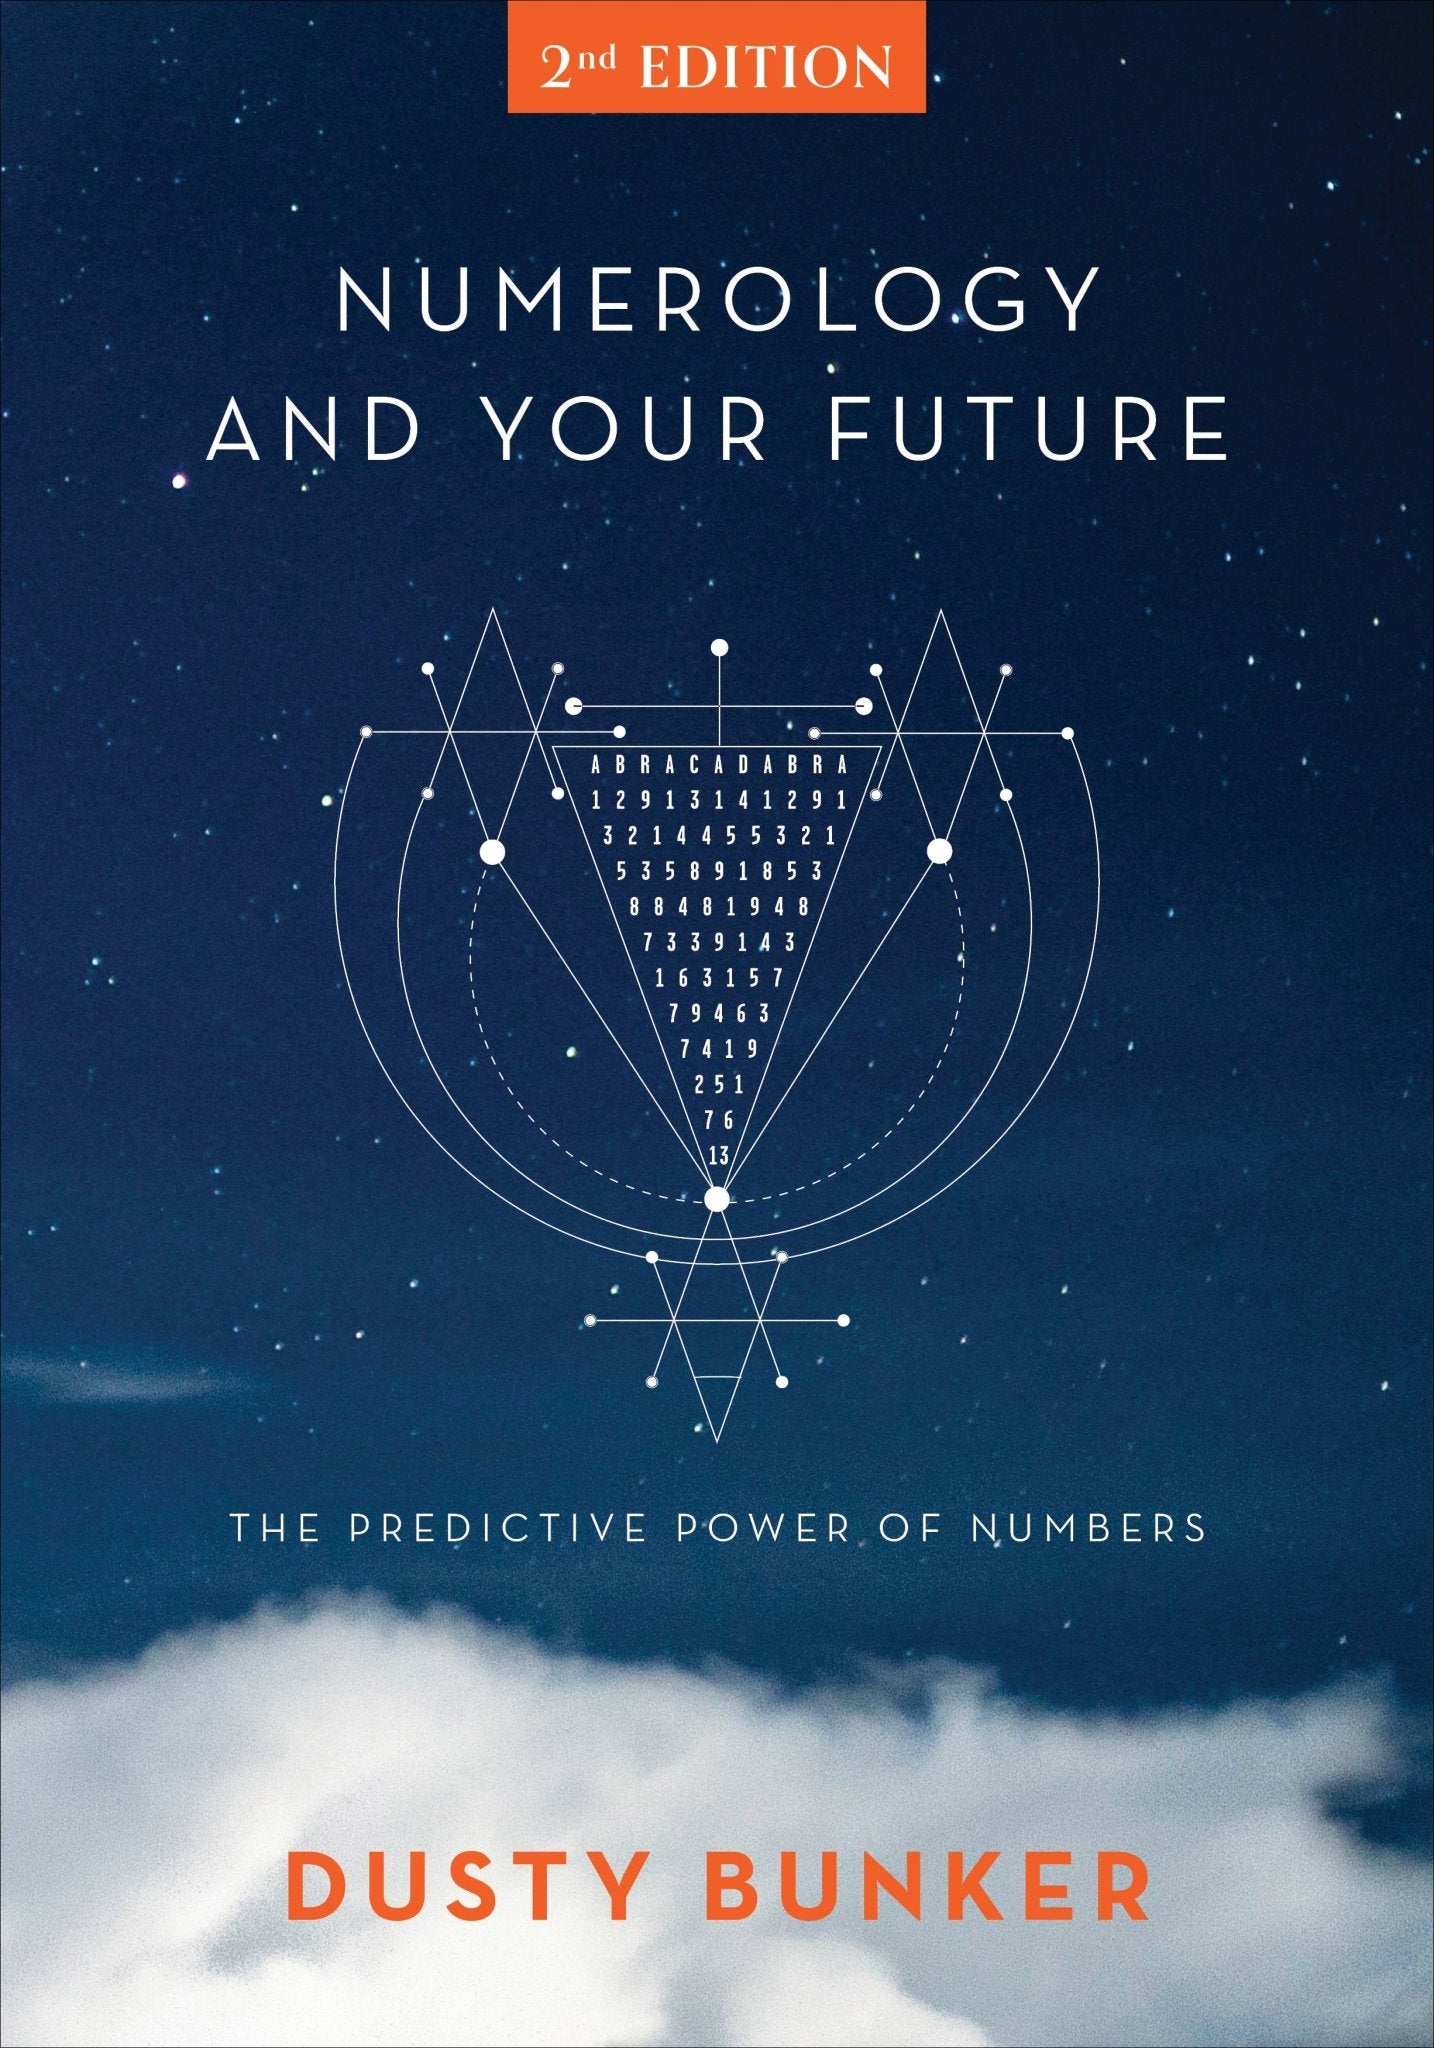 Numerology and Your Future | 2nd Edition - Spiral Circle